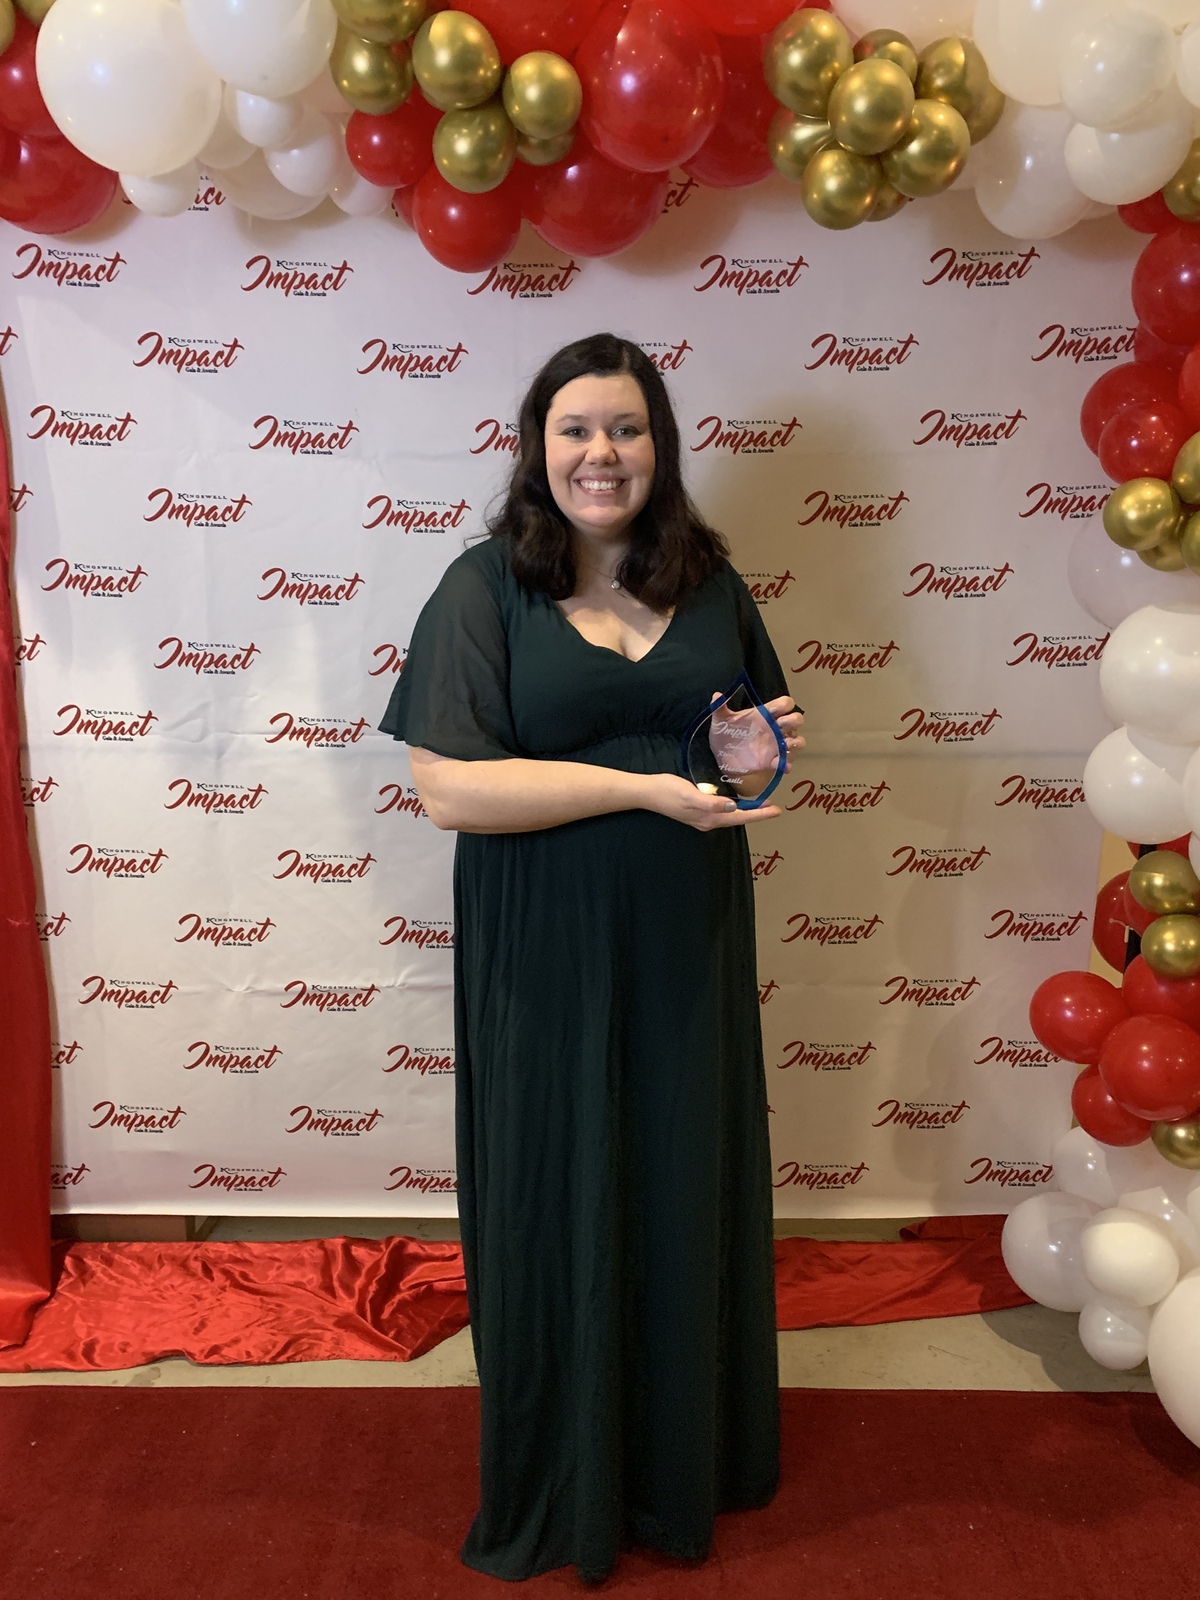 Woman wearing dress, holds up award against photo backdrop